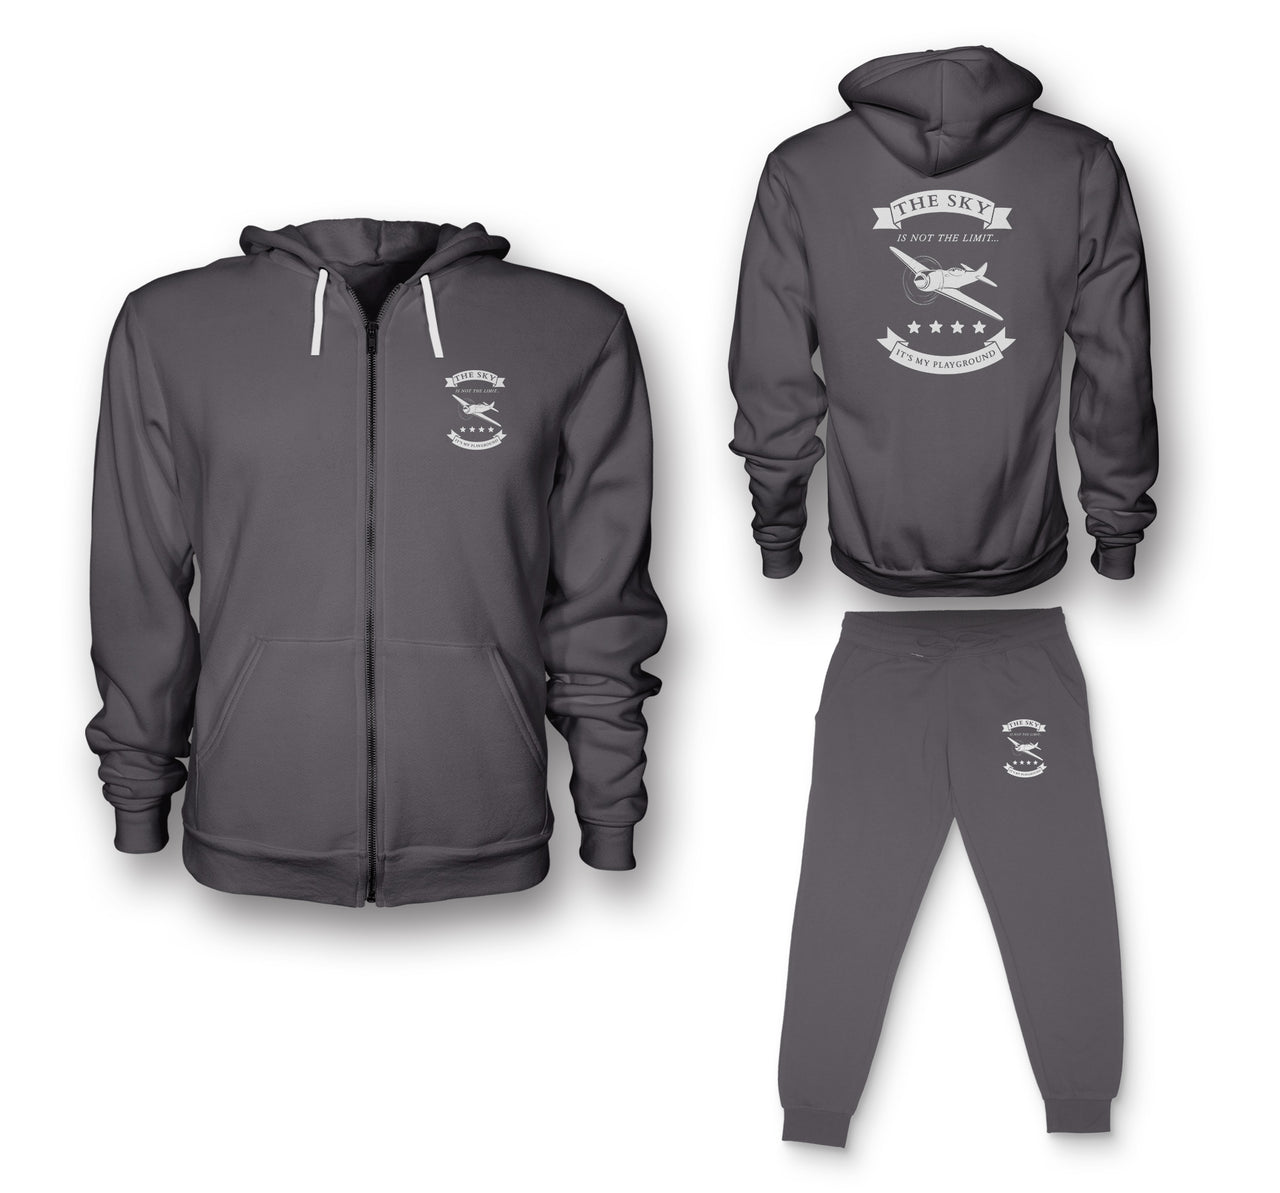 The Sky is not the limit, It's my playground Designed Zipped Hoodies & Sweatpants Set